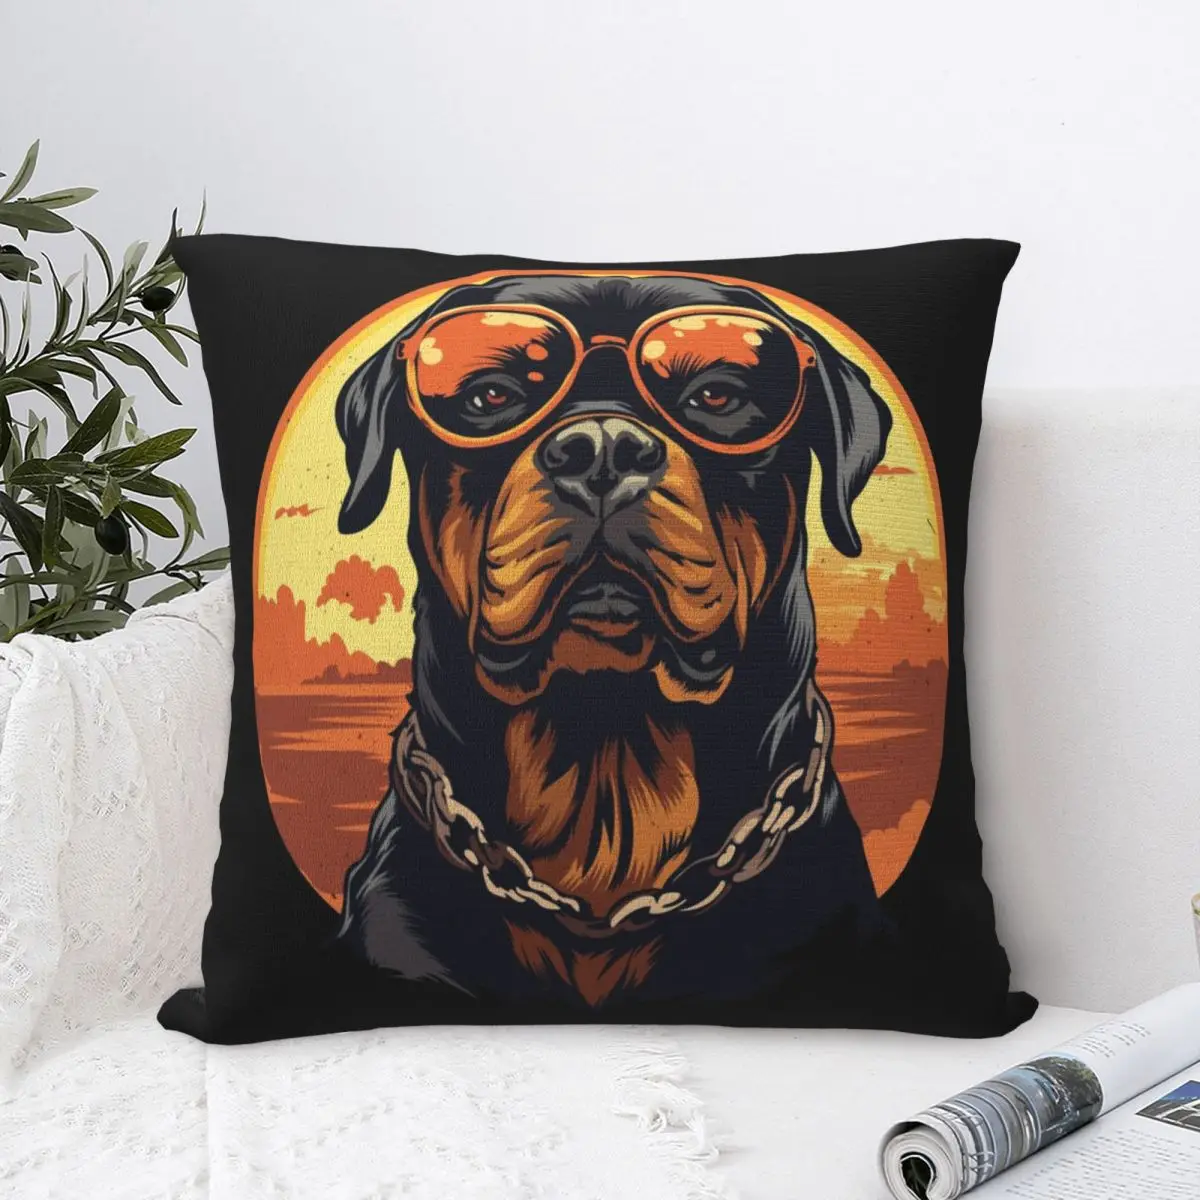 

Rottweiler Dog Pillowcase Polyester Pillows Cover Cushion Comfort Throw Pillow Sofa Decorative Cushions Used for Home Bedroom